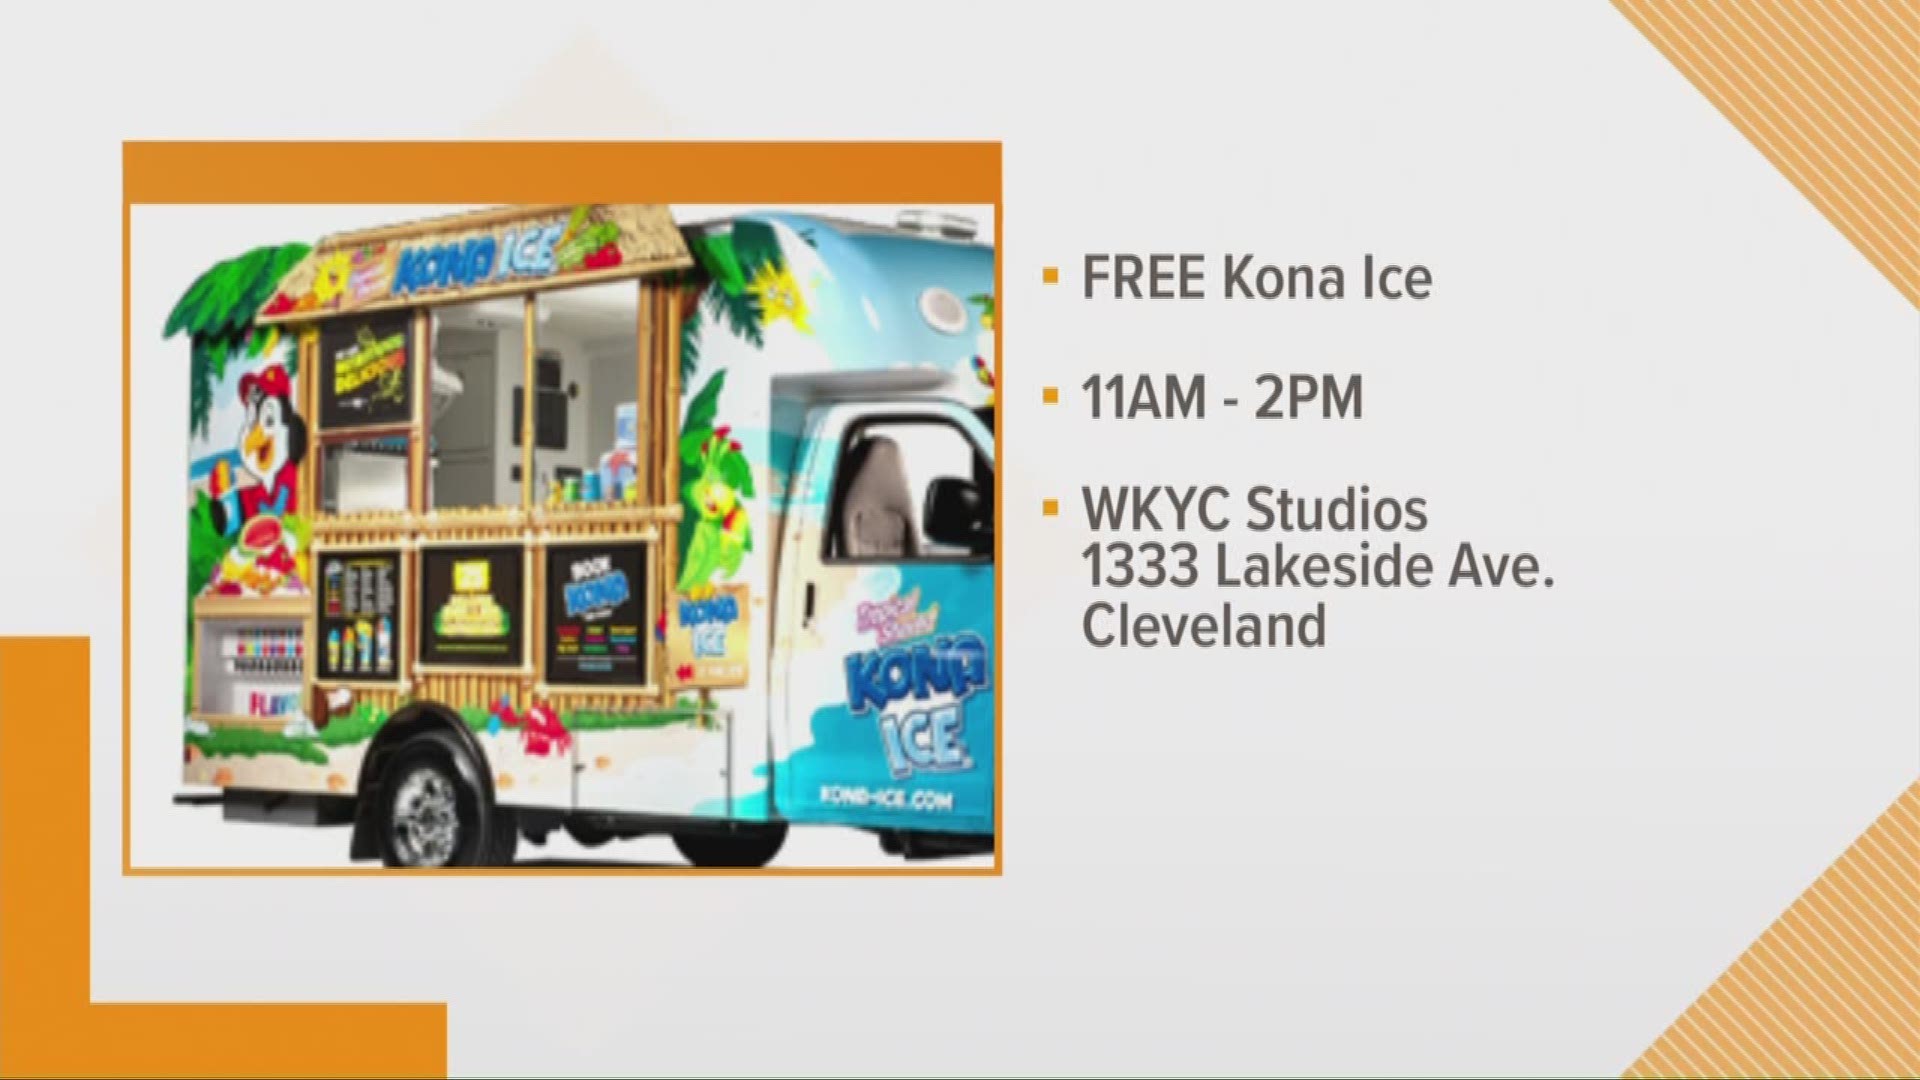 April 17, 2018: Want a relief from tax day? What about a way to dream of summer heat? Drop by WKYC's studios for some free Kona Ice.